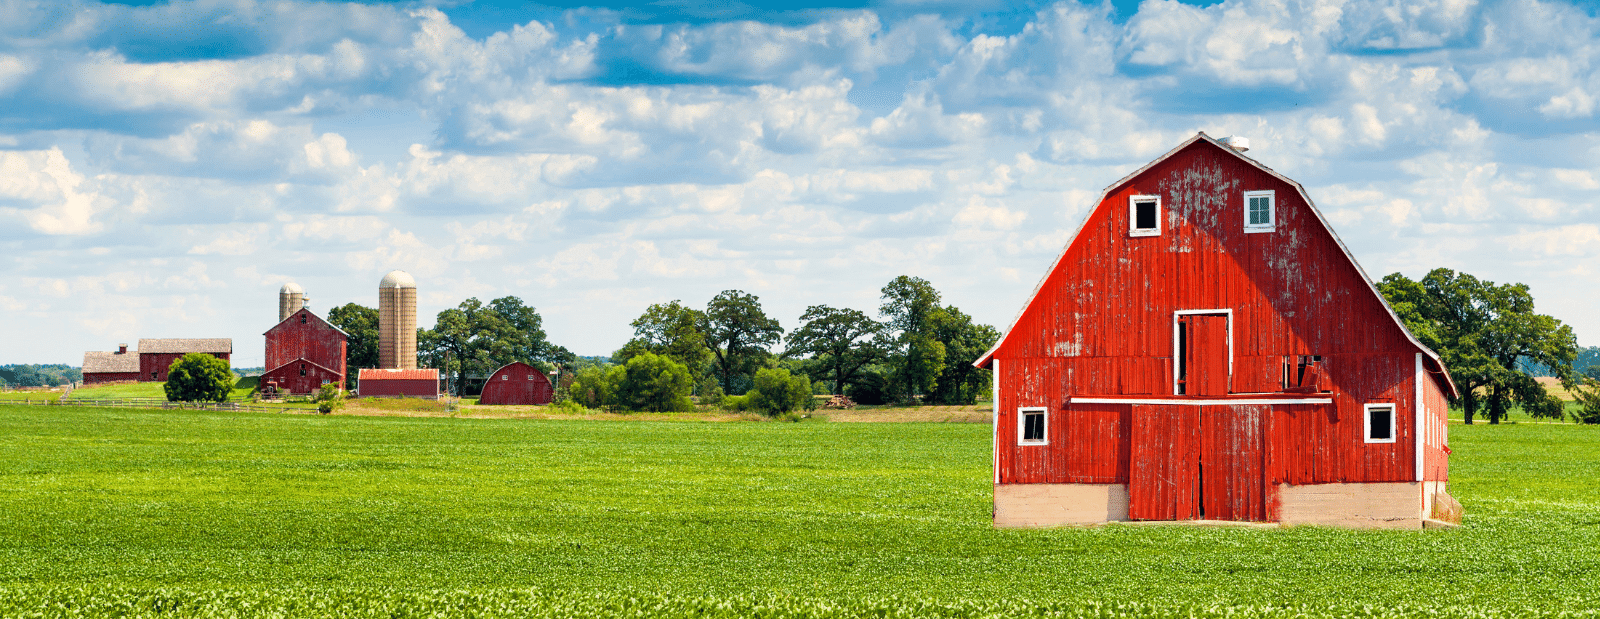 Rural Broadband Report - Image of a red barn in a field